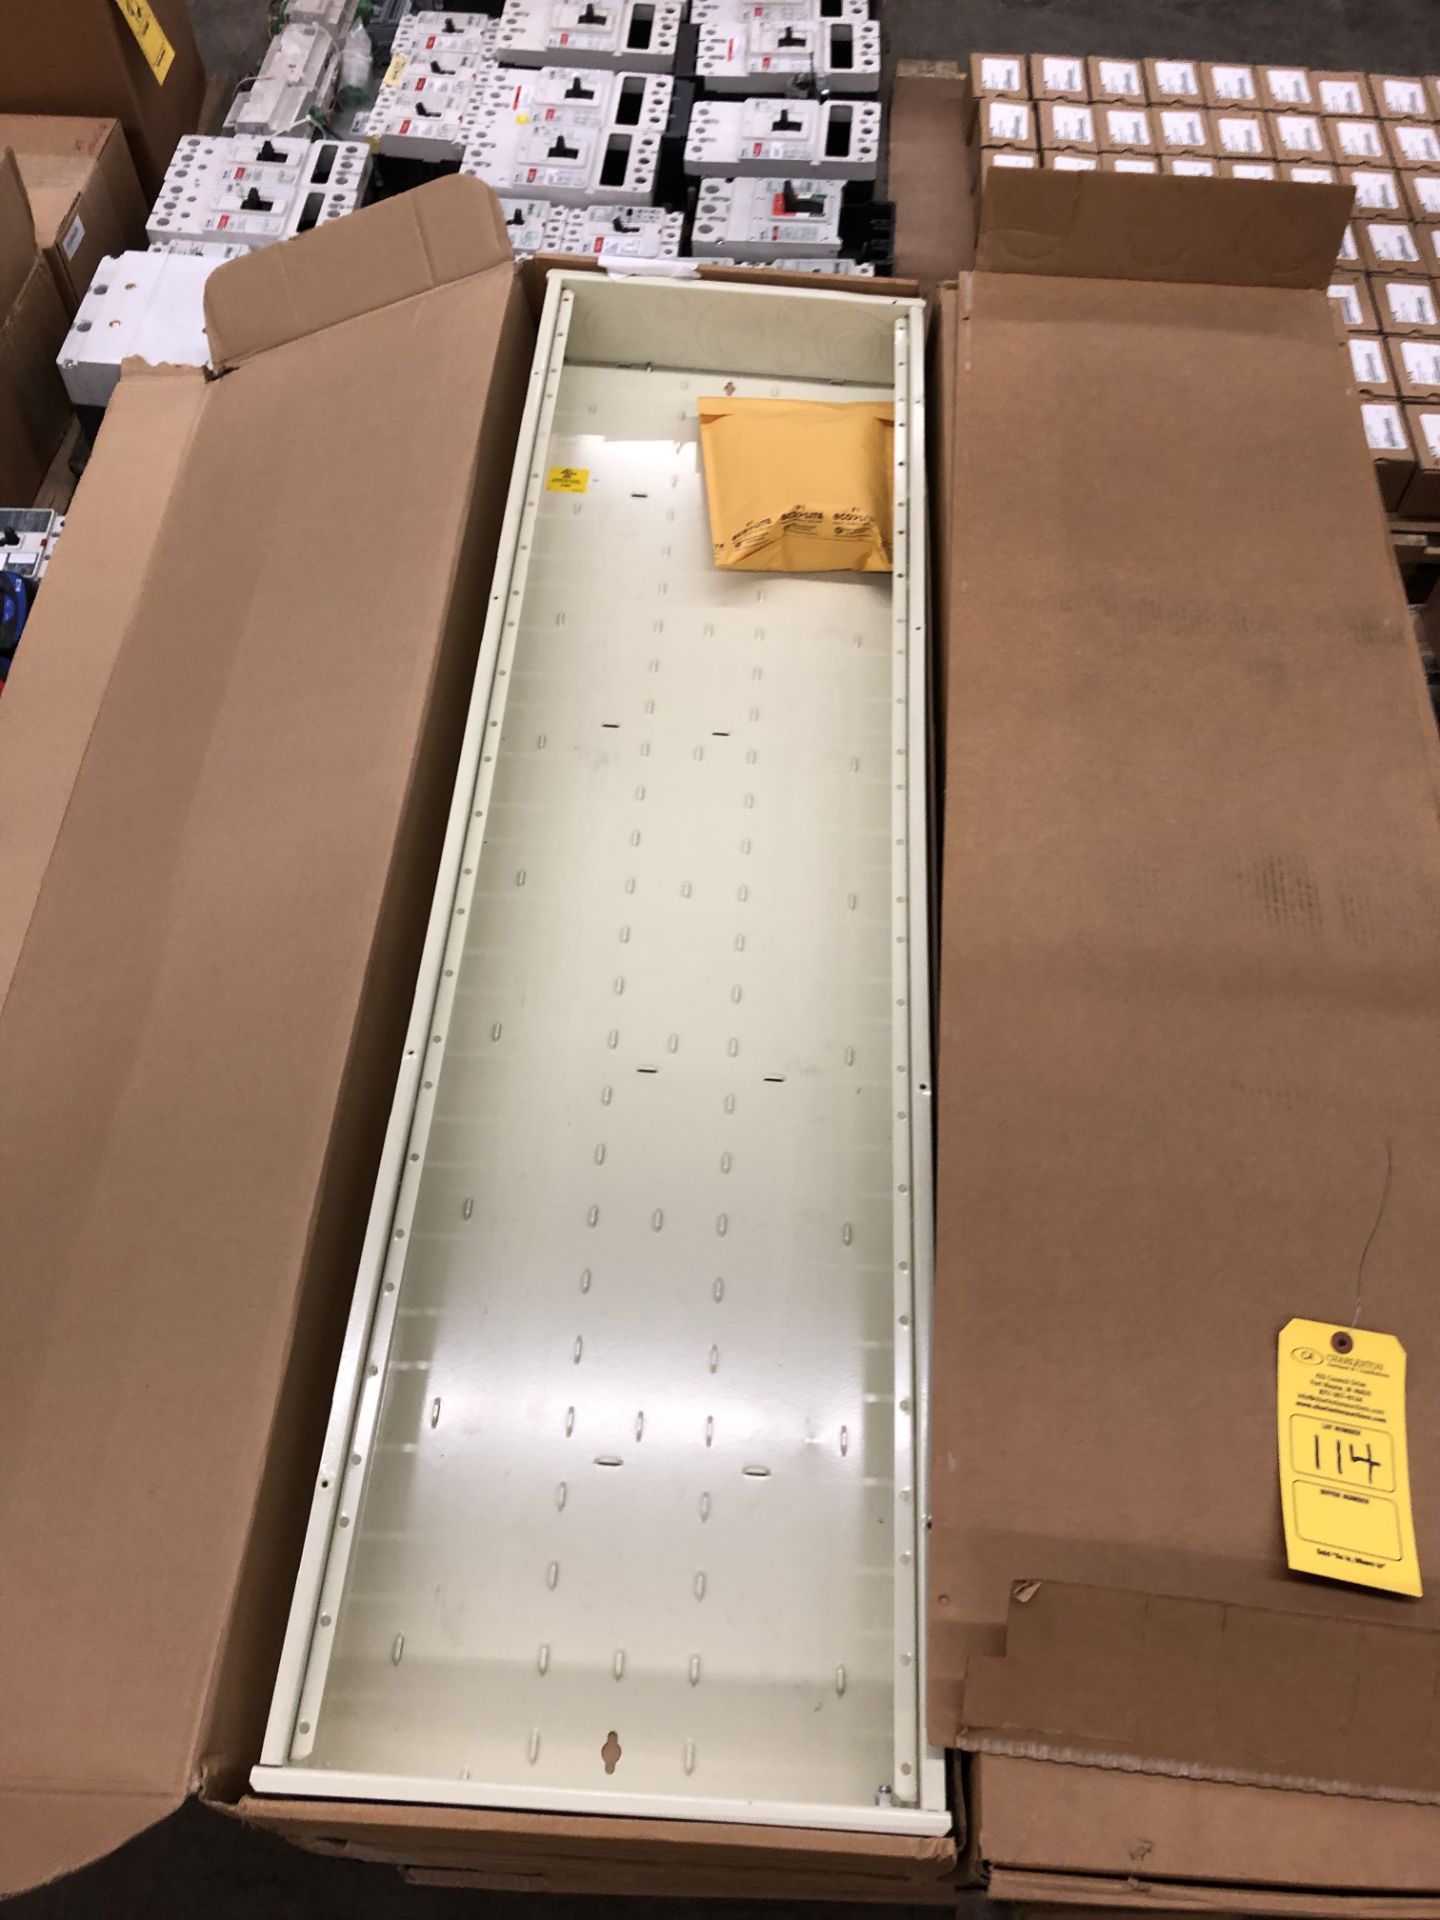 PALLET OF (6) EATON QUICK NETWORK 54" DIST. PANEL W/ 110V POWER OUTLET (INDOOR) - Image 2 of 3